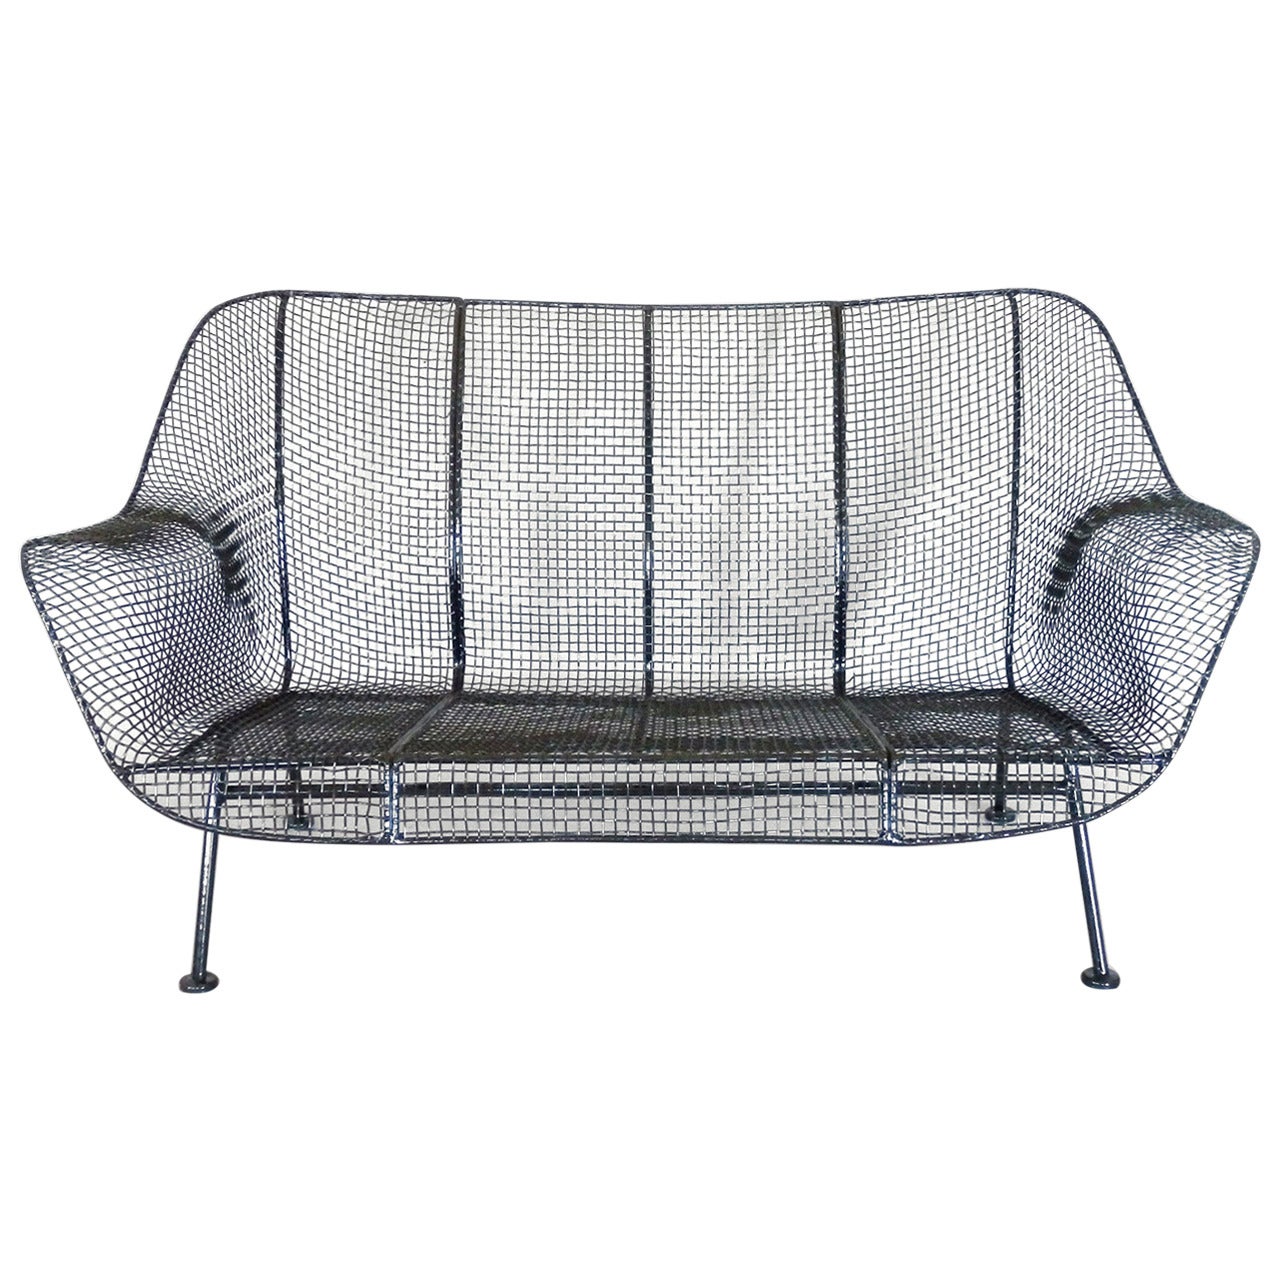 Woodard Wrought Iron with Mesh Settee For Sale